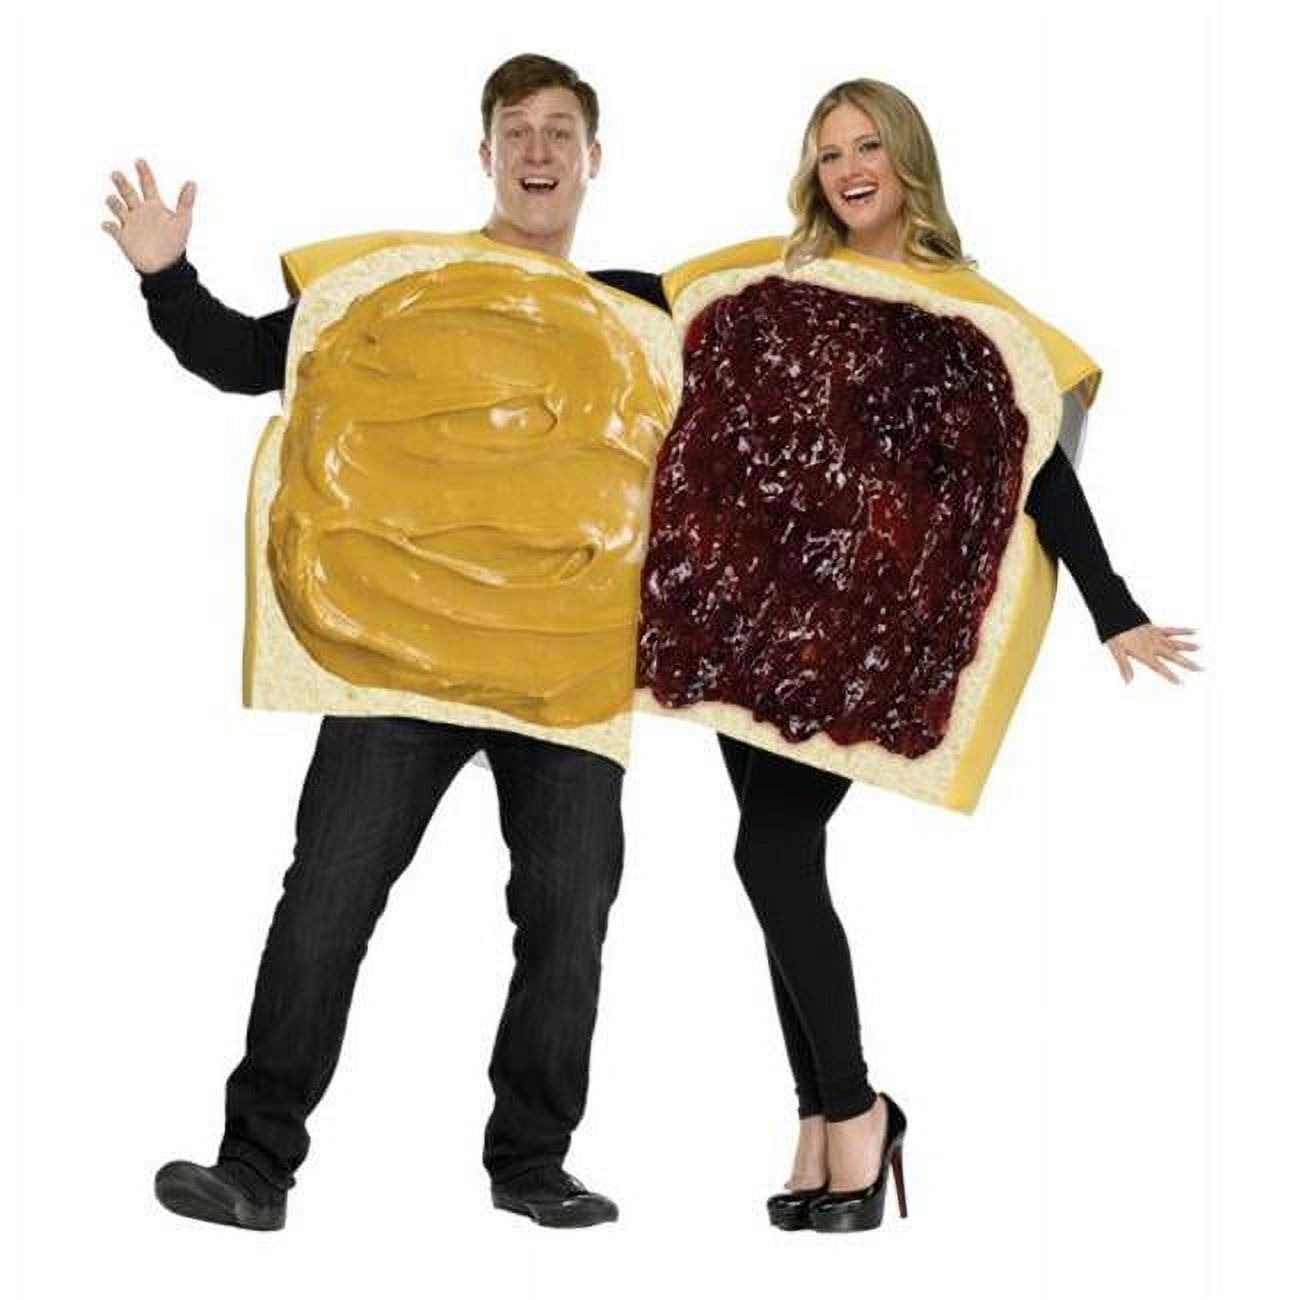 Fun World Couple Costume Halloween Fancy-Dress Costume for Adult, Regular One Size - image 1 of 2